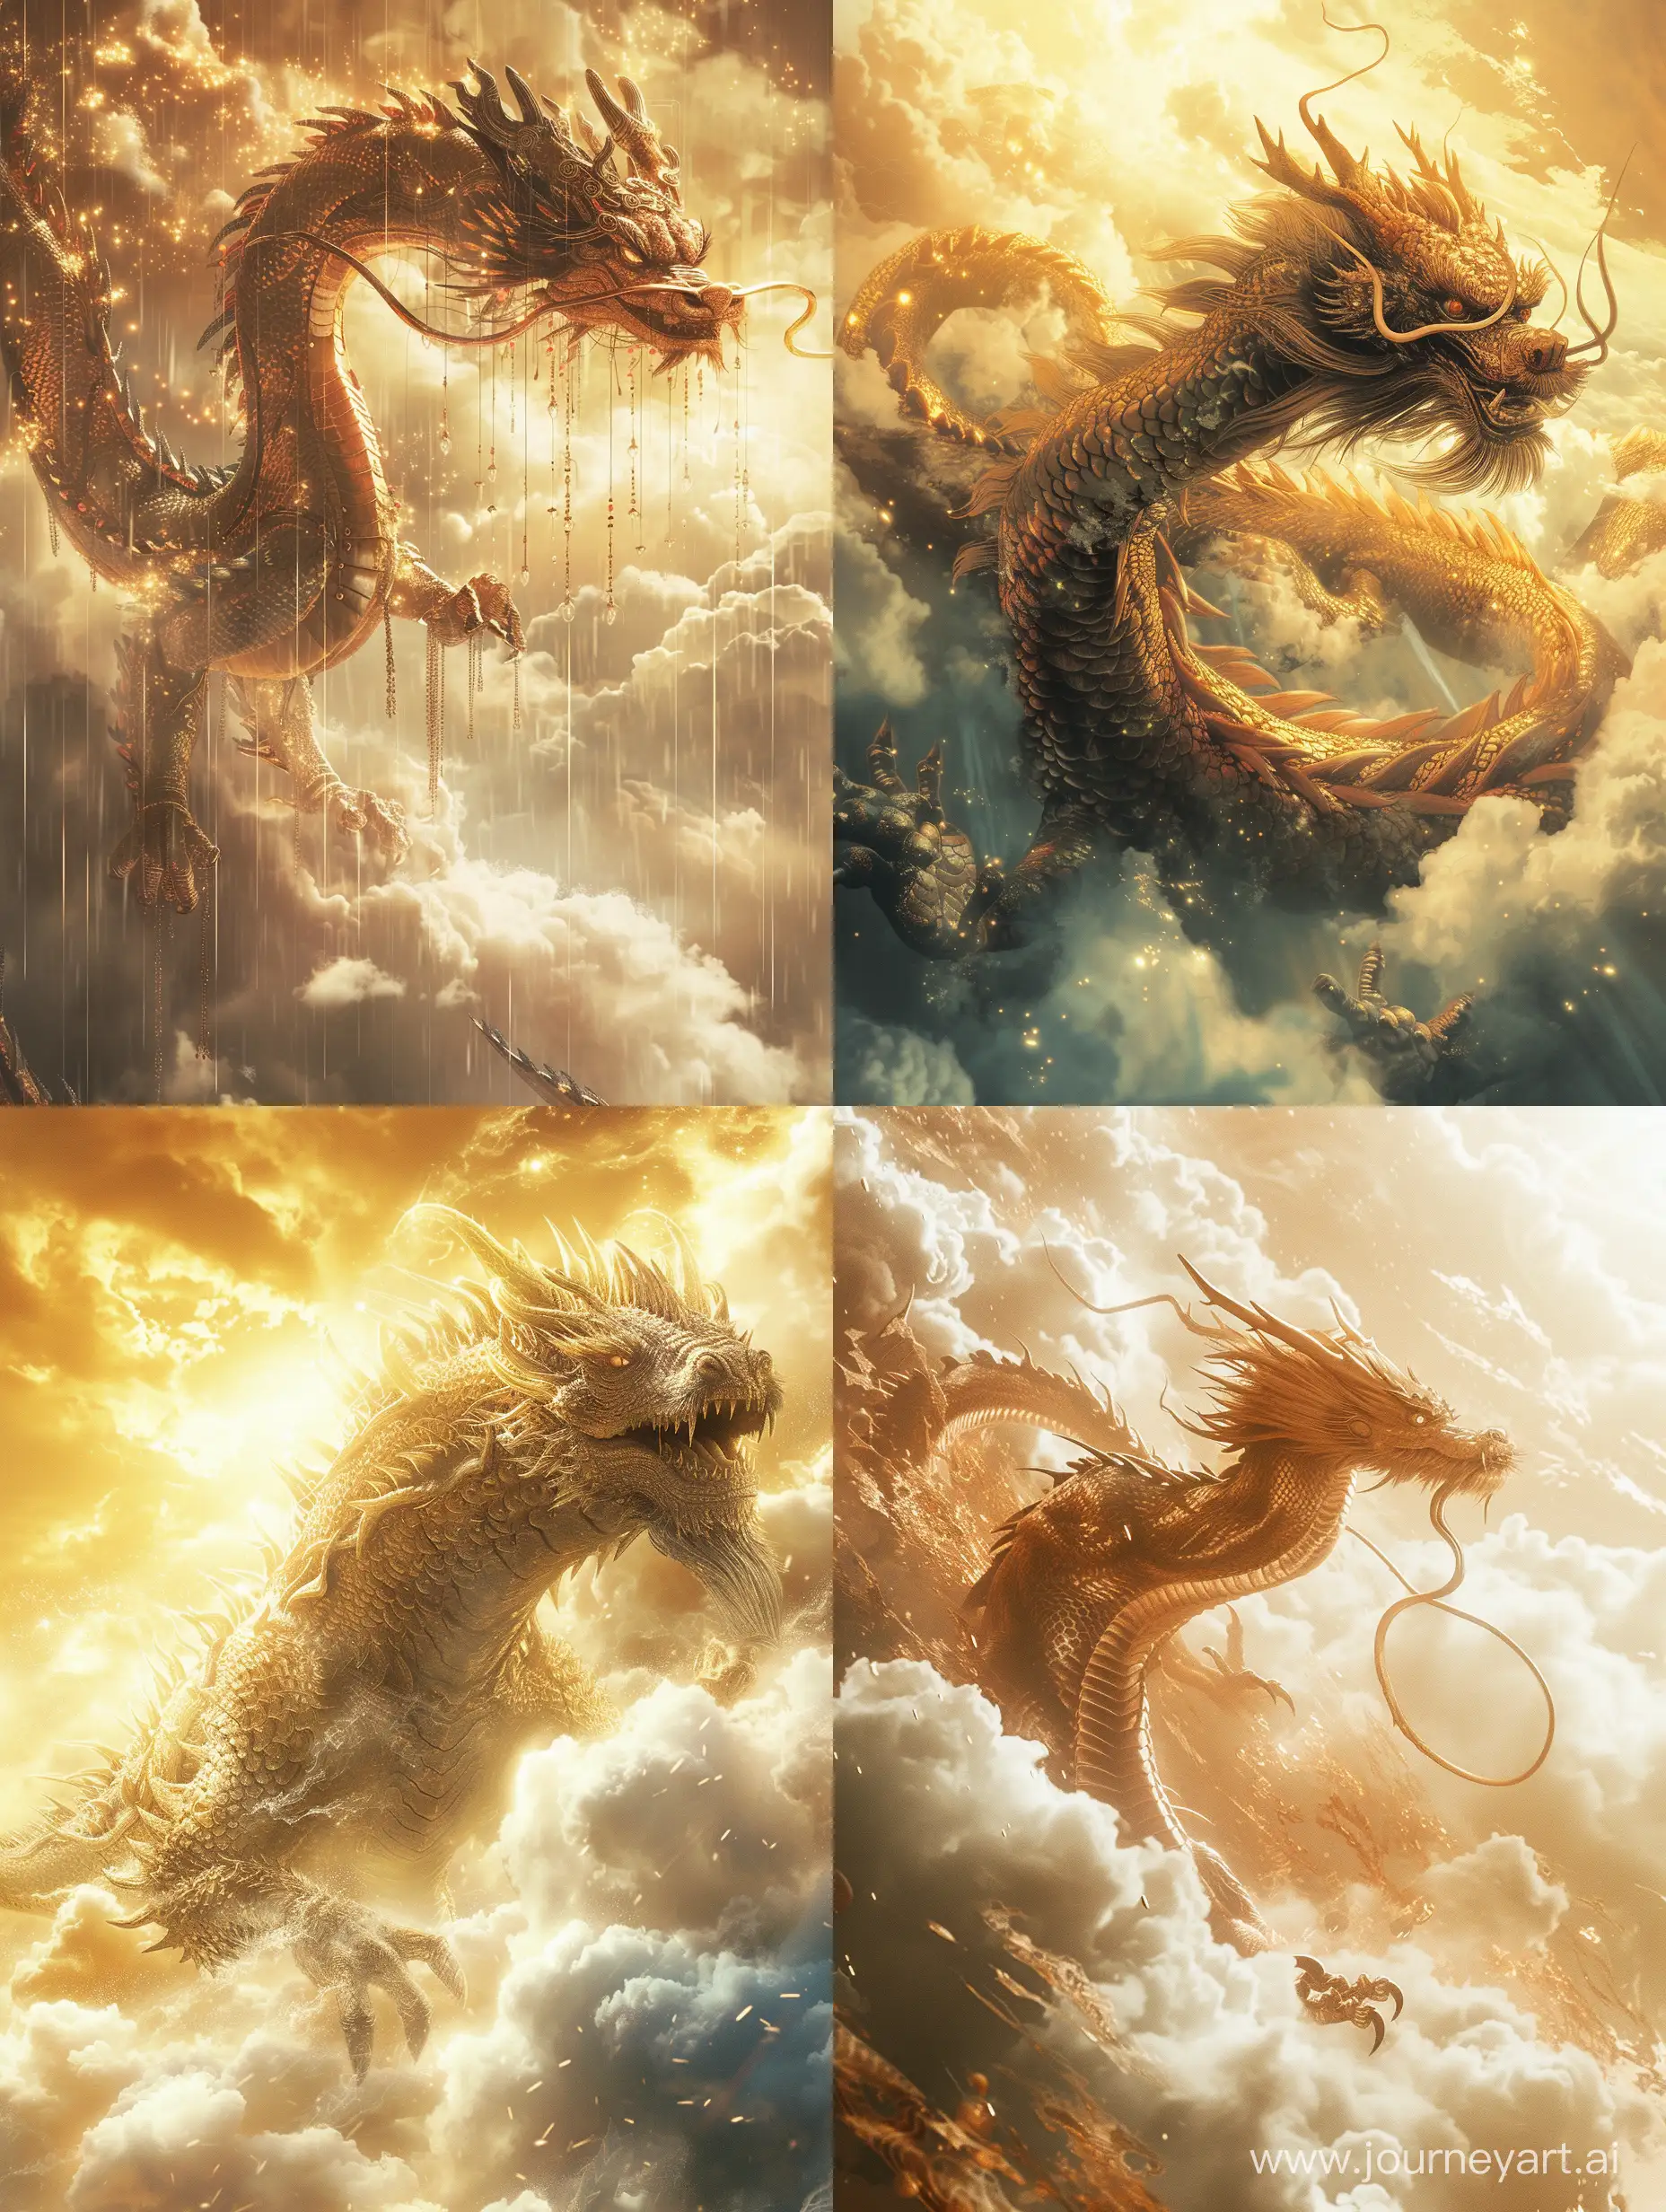 Majestic-Chinese-Dragon-Emerging-from-Cyberpunk-Clouds